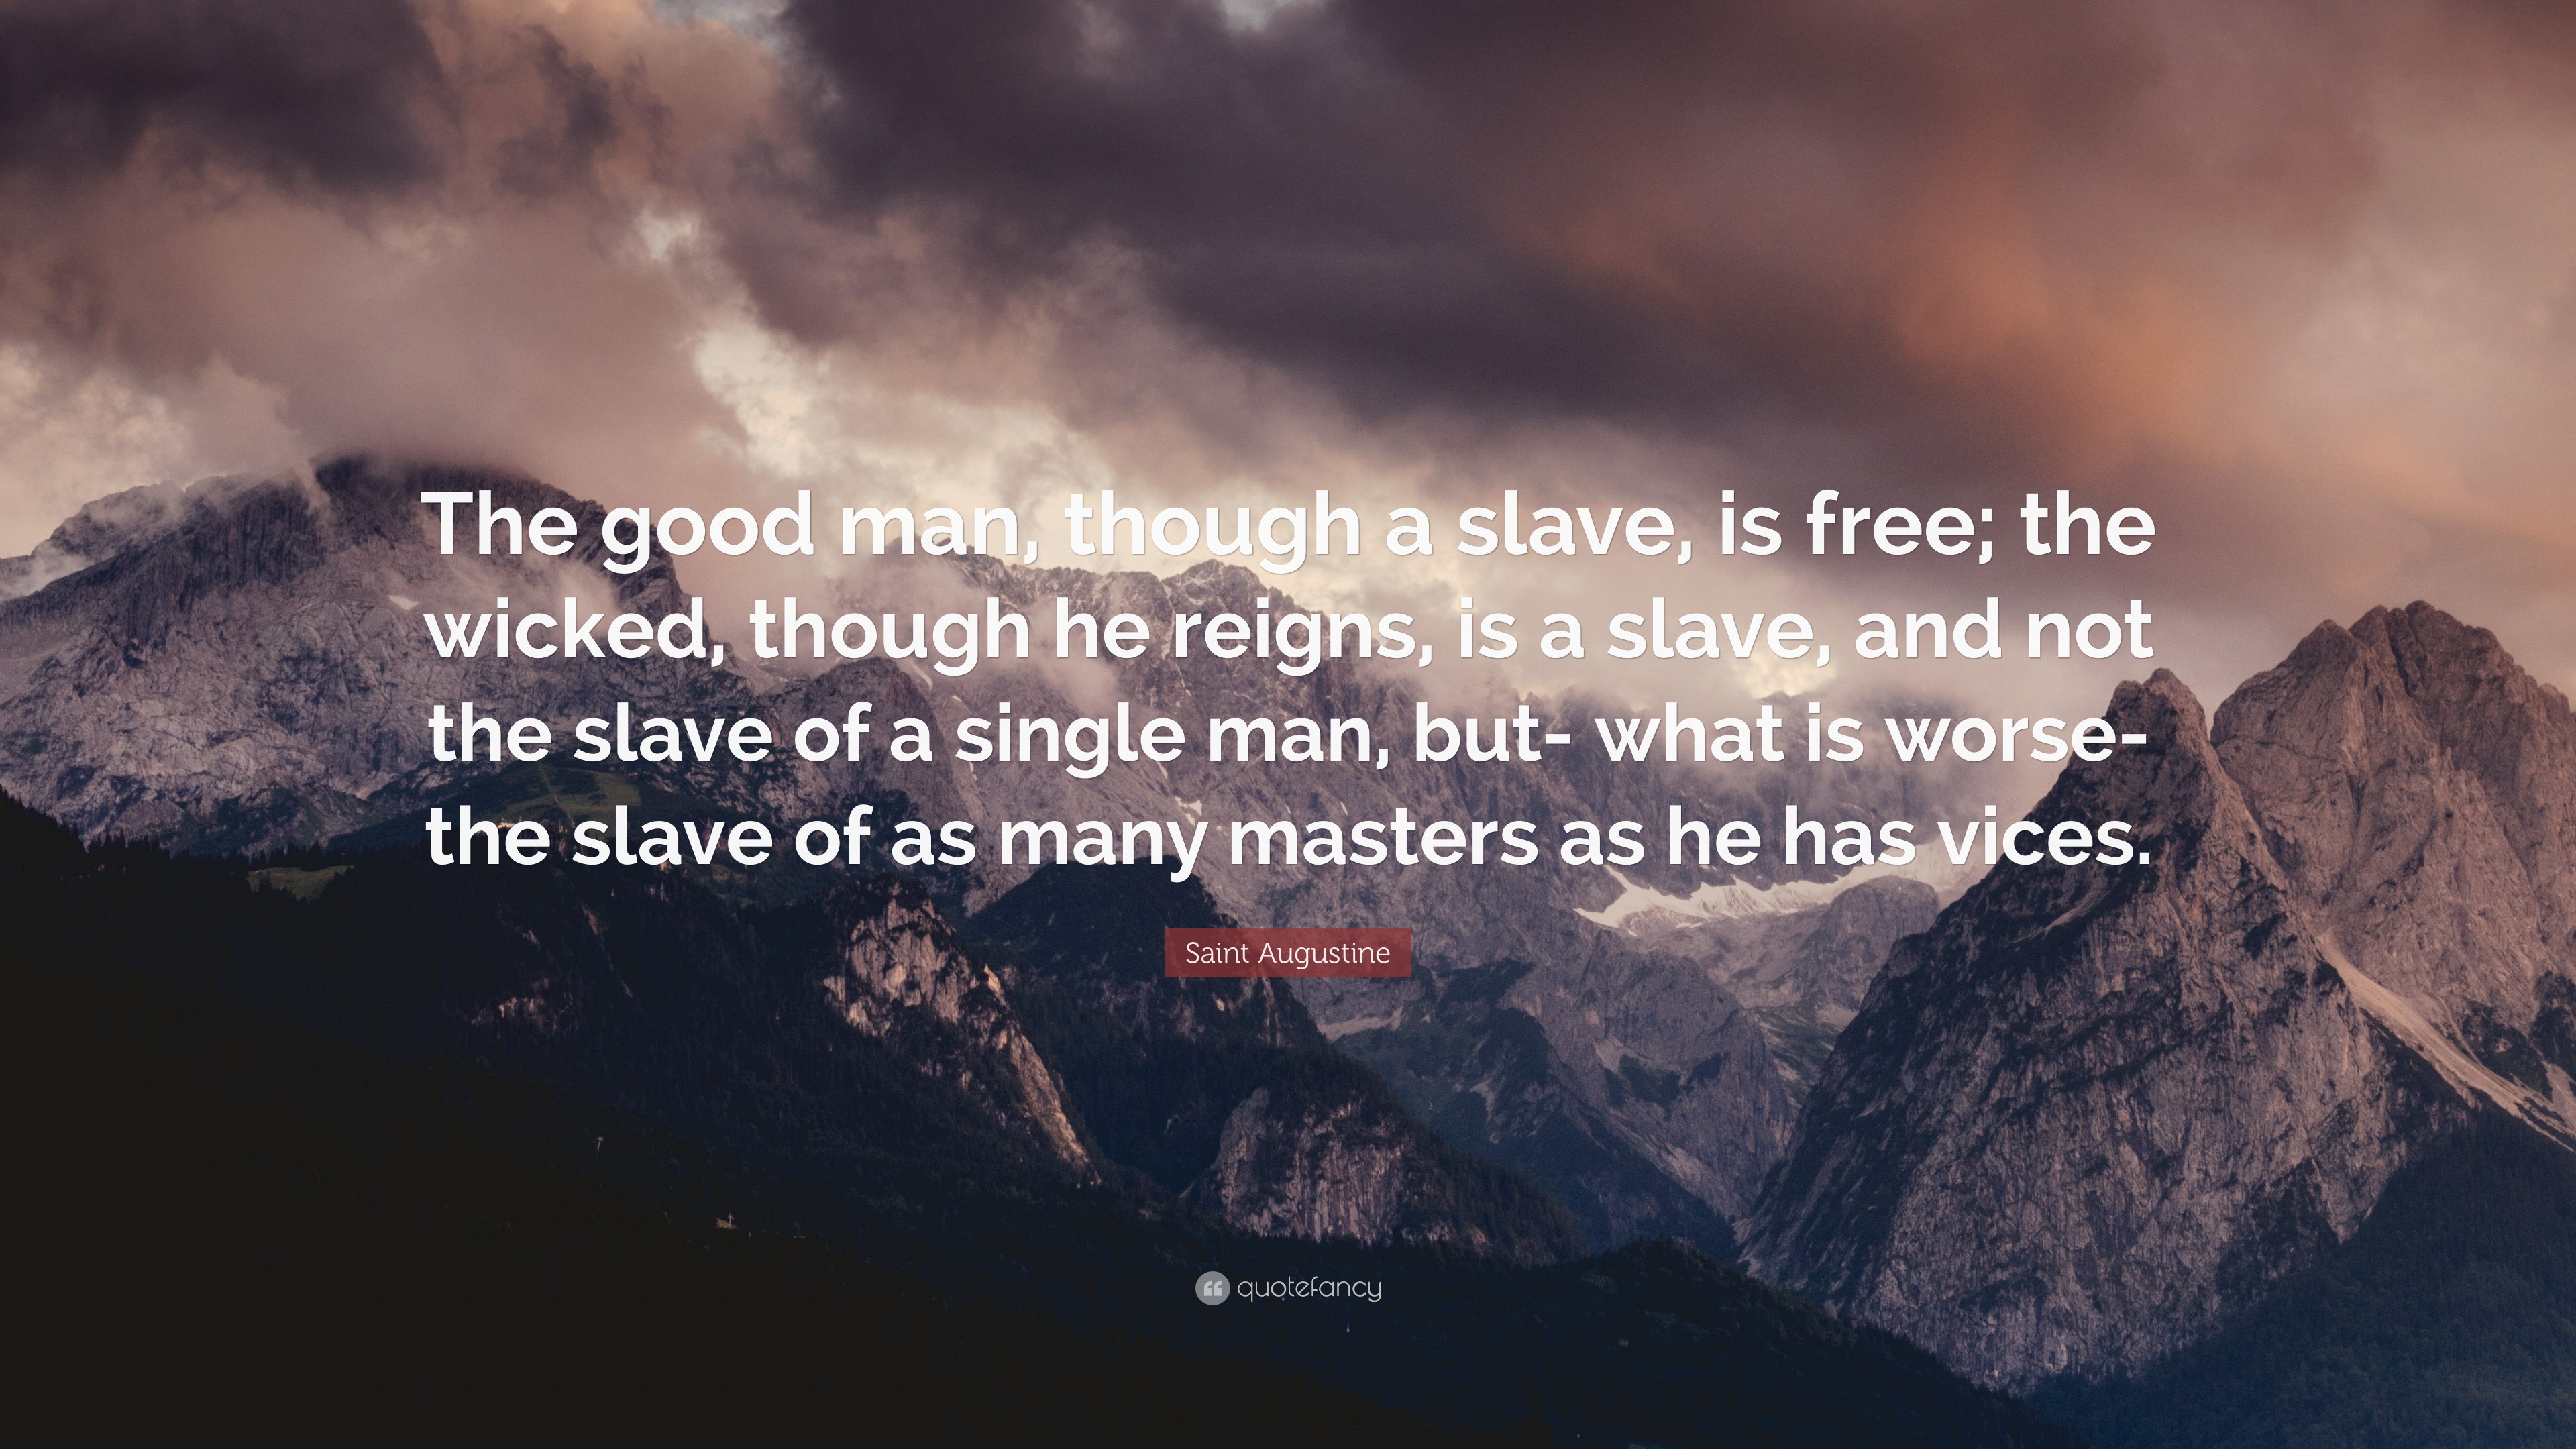 Saint Augustine Quote: “The good man, though a slave, is free; the ...